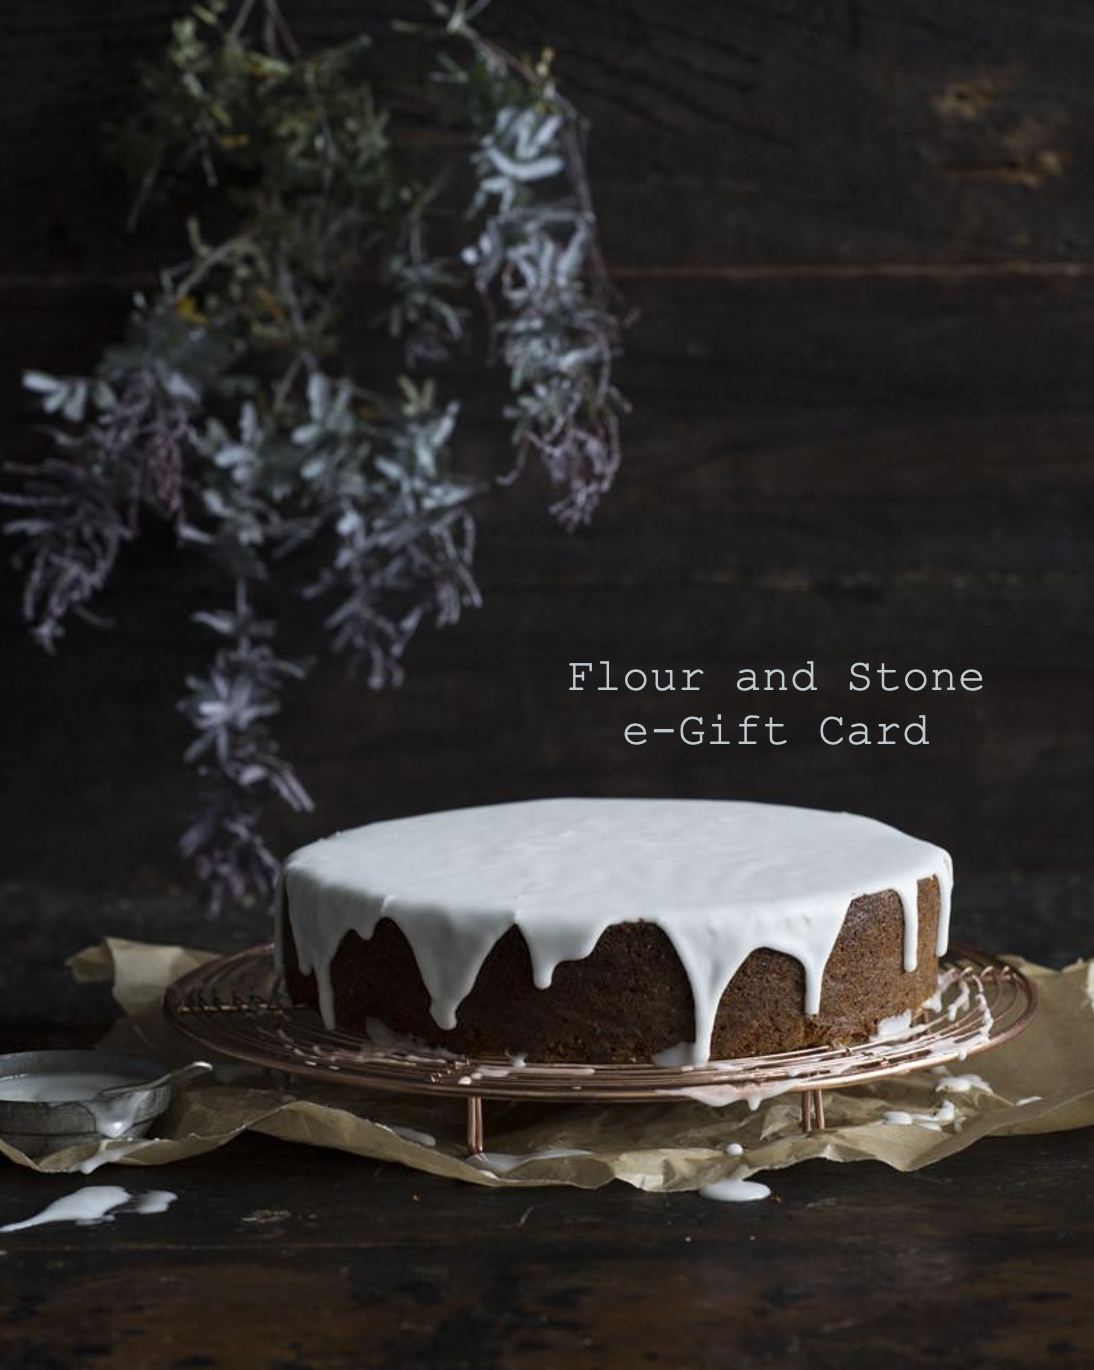 Flour and Stone e-gift card: The perfect digital gift for treating your loved ones to delicious bakery delights